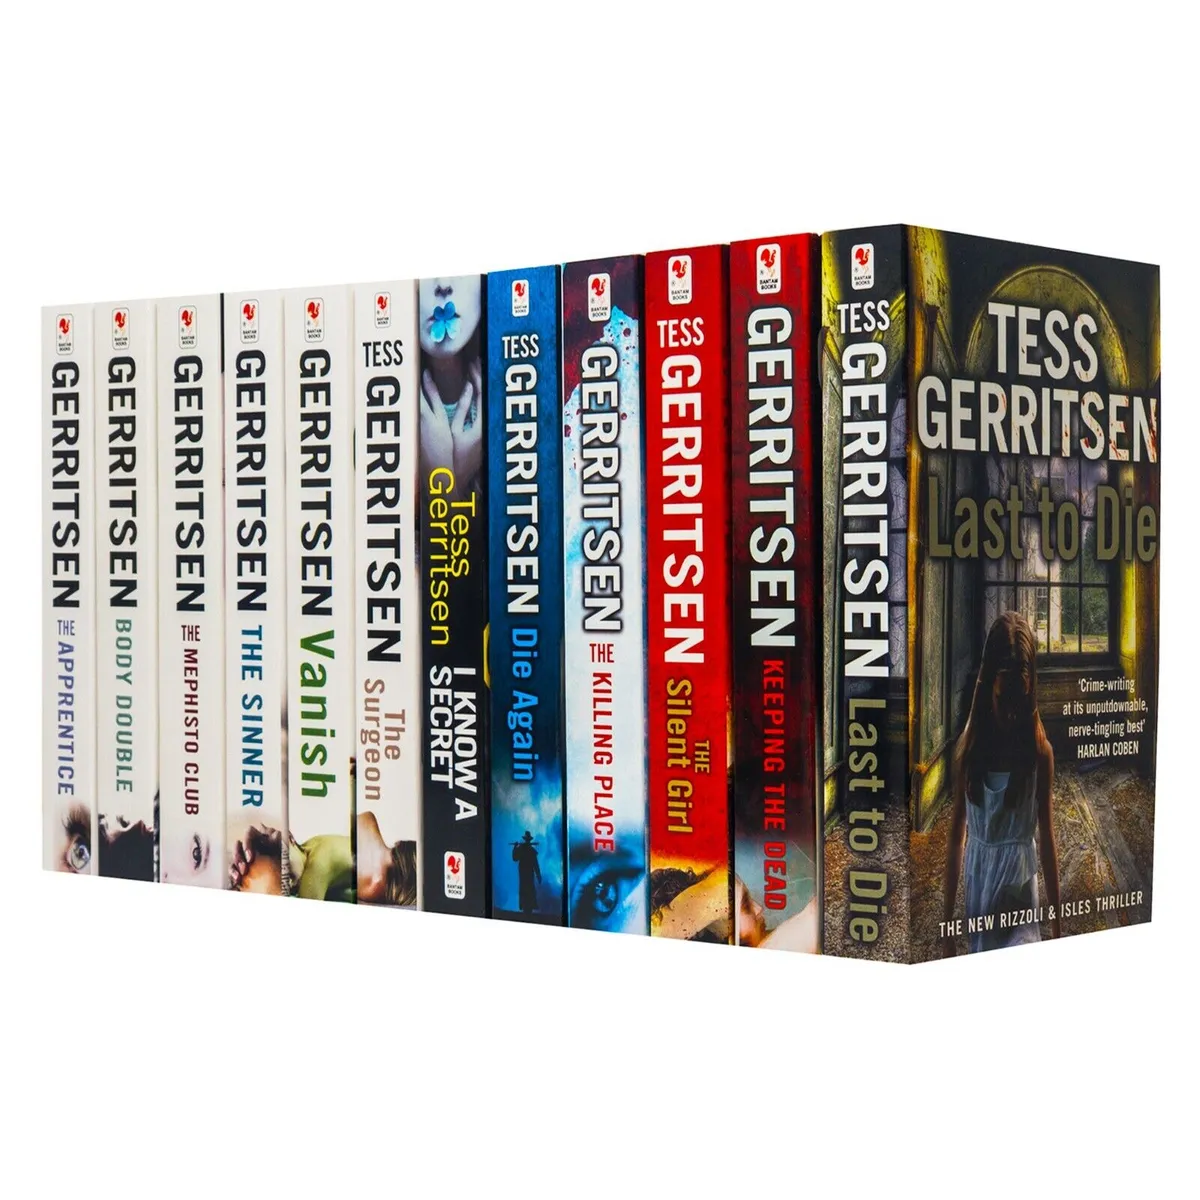 Tess Gerritsen Rizzoli and Isles Thriller 12 Books Collection Set